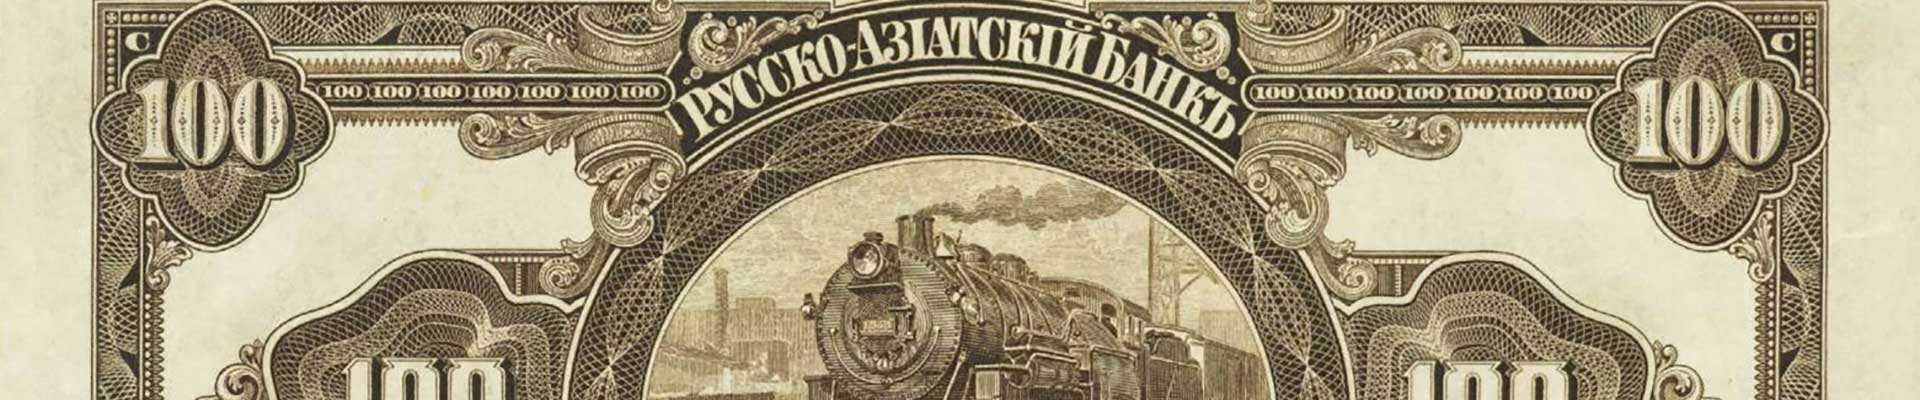 Banknotes of the Russo-Asiatic Bank header image